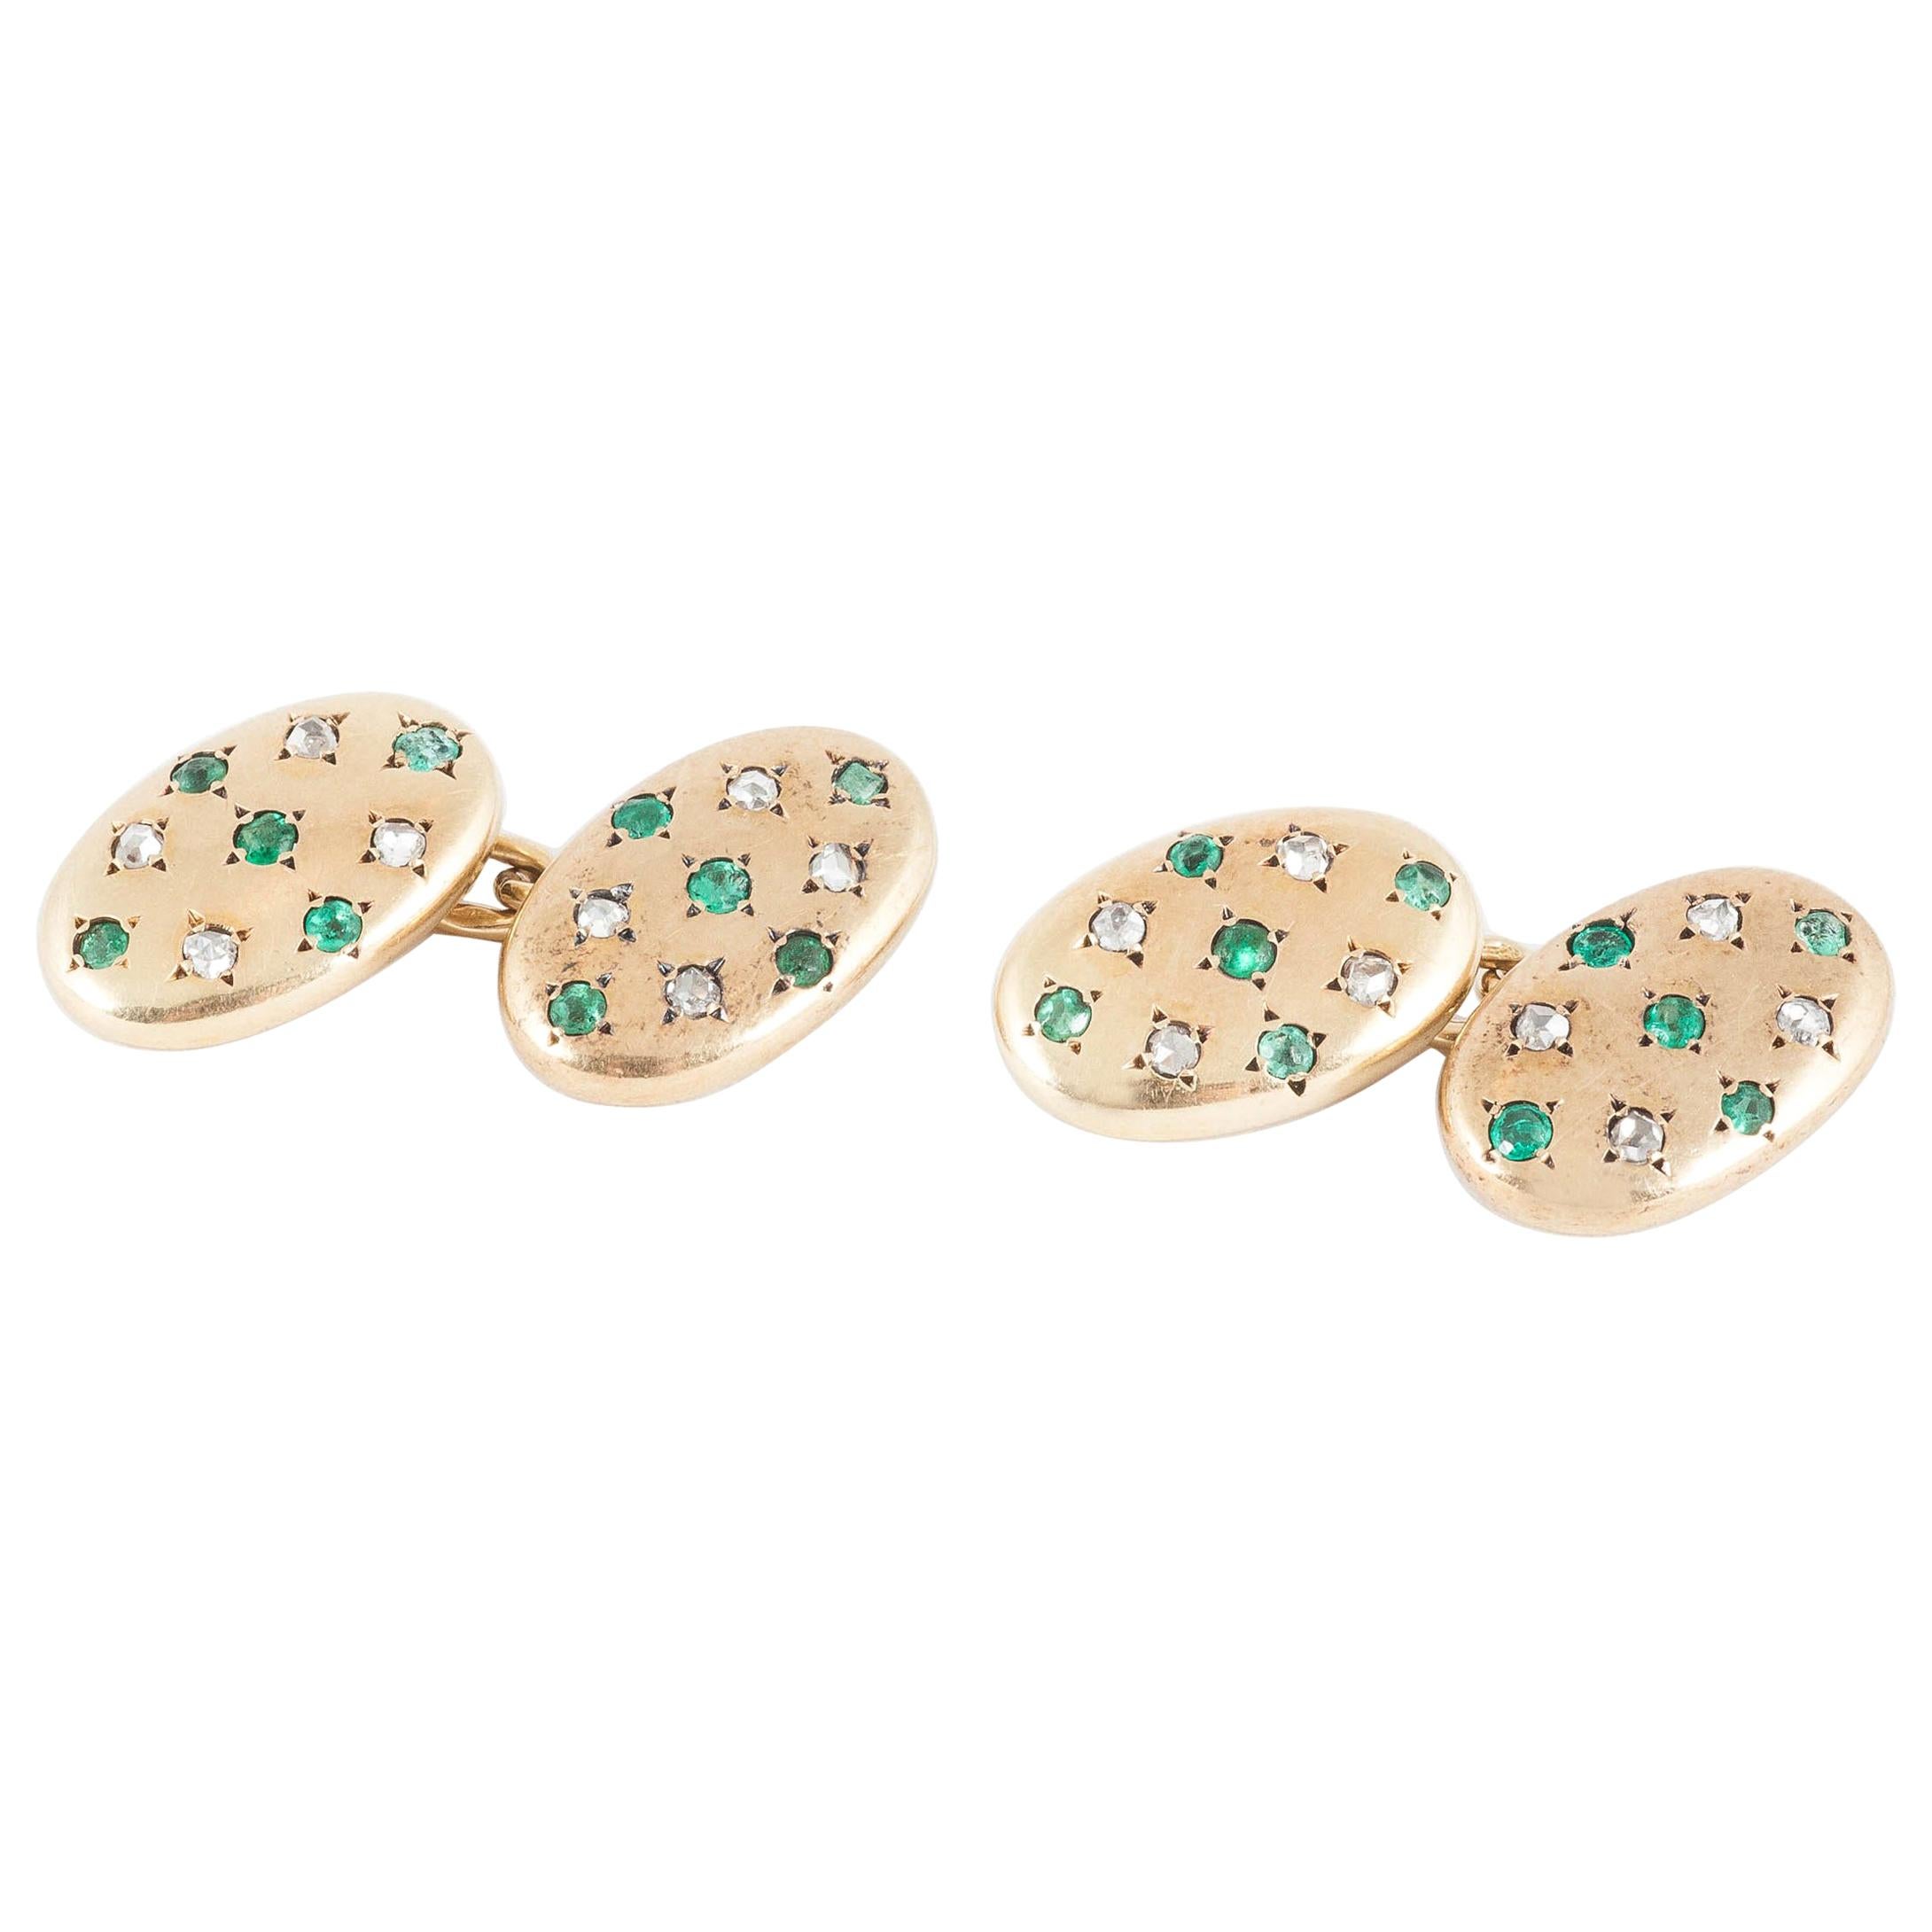 Cufflinks in 18 Karat Gold set with Emeralds and Diamonds, French circa 1900. For Sale